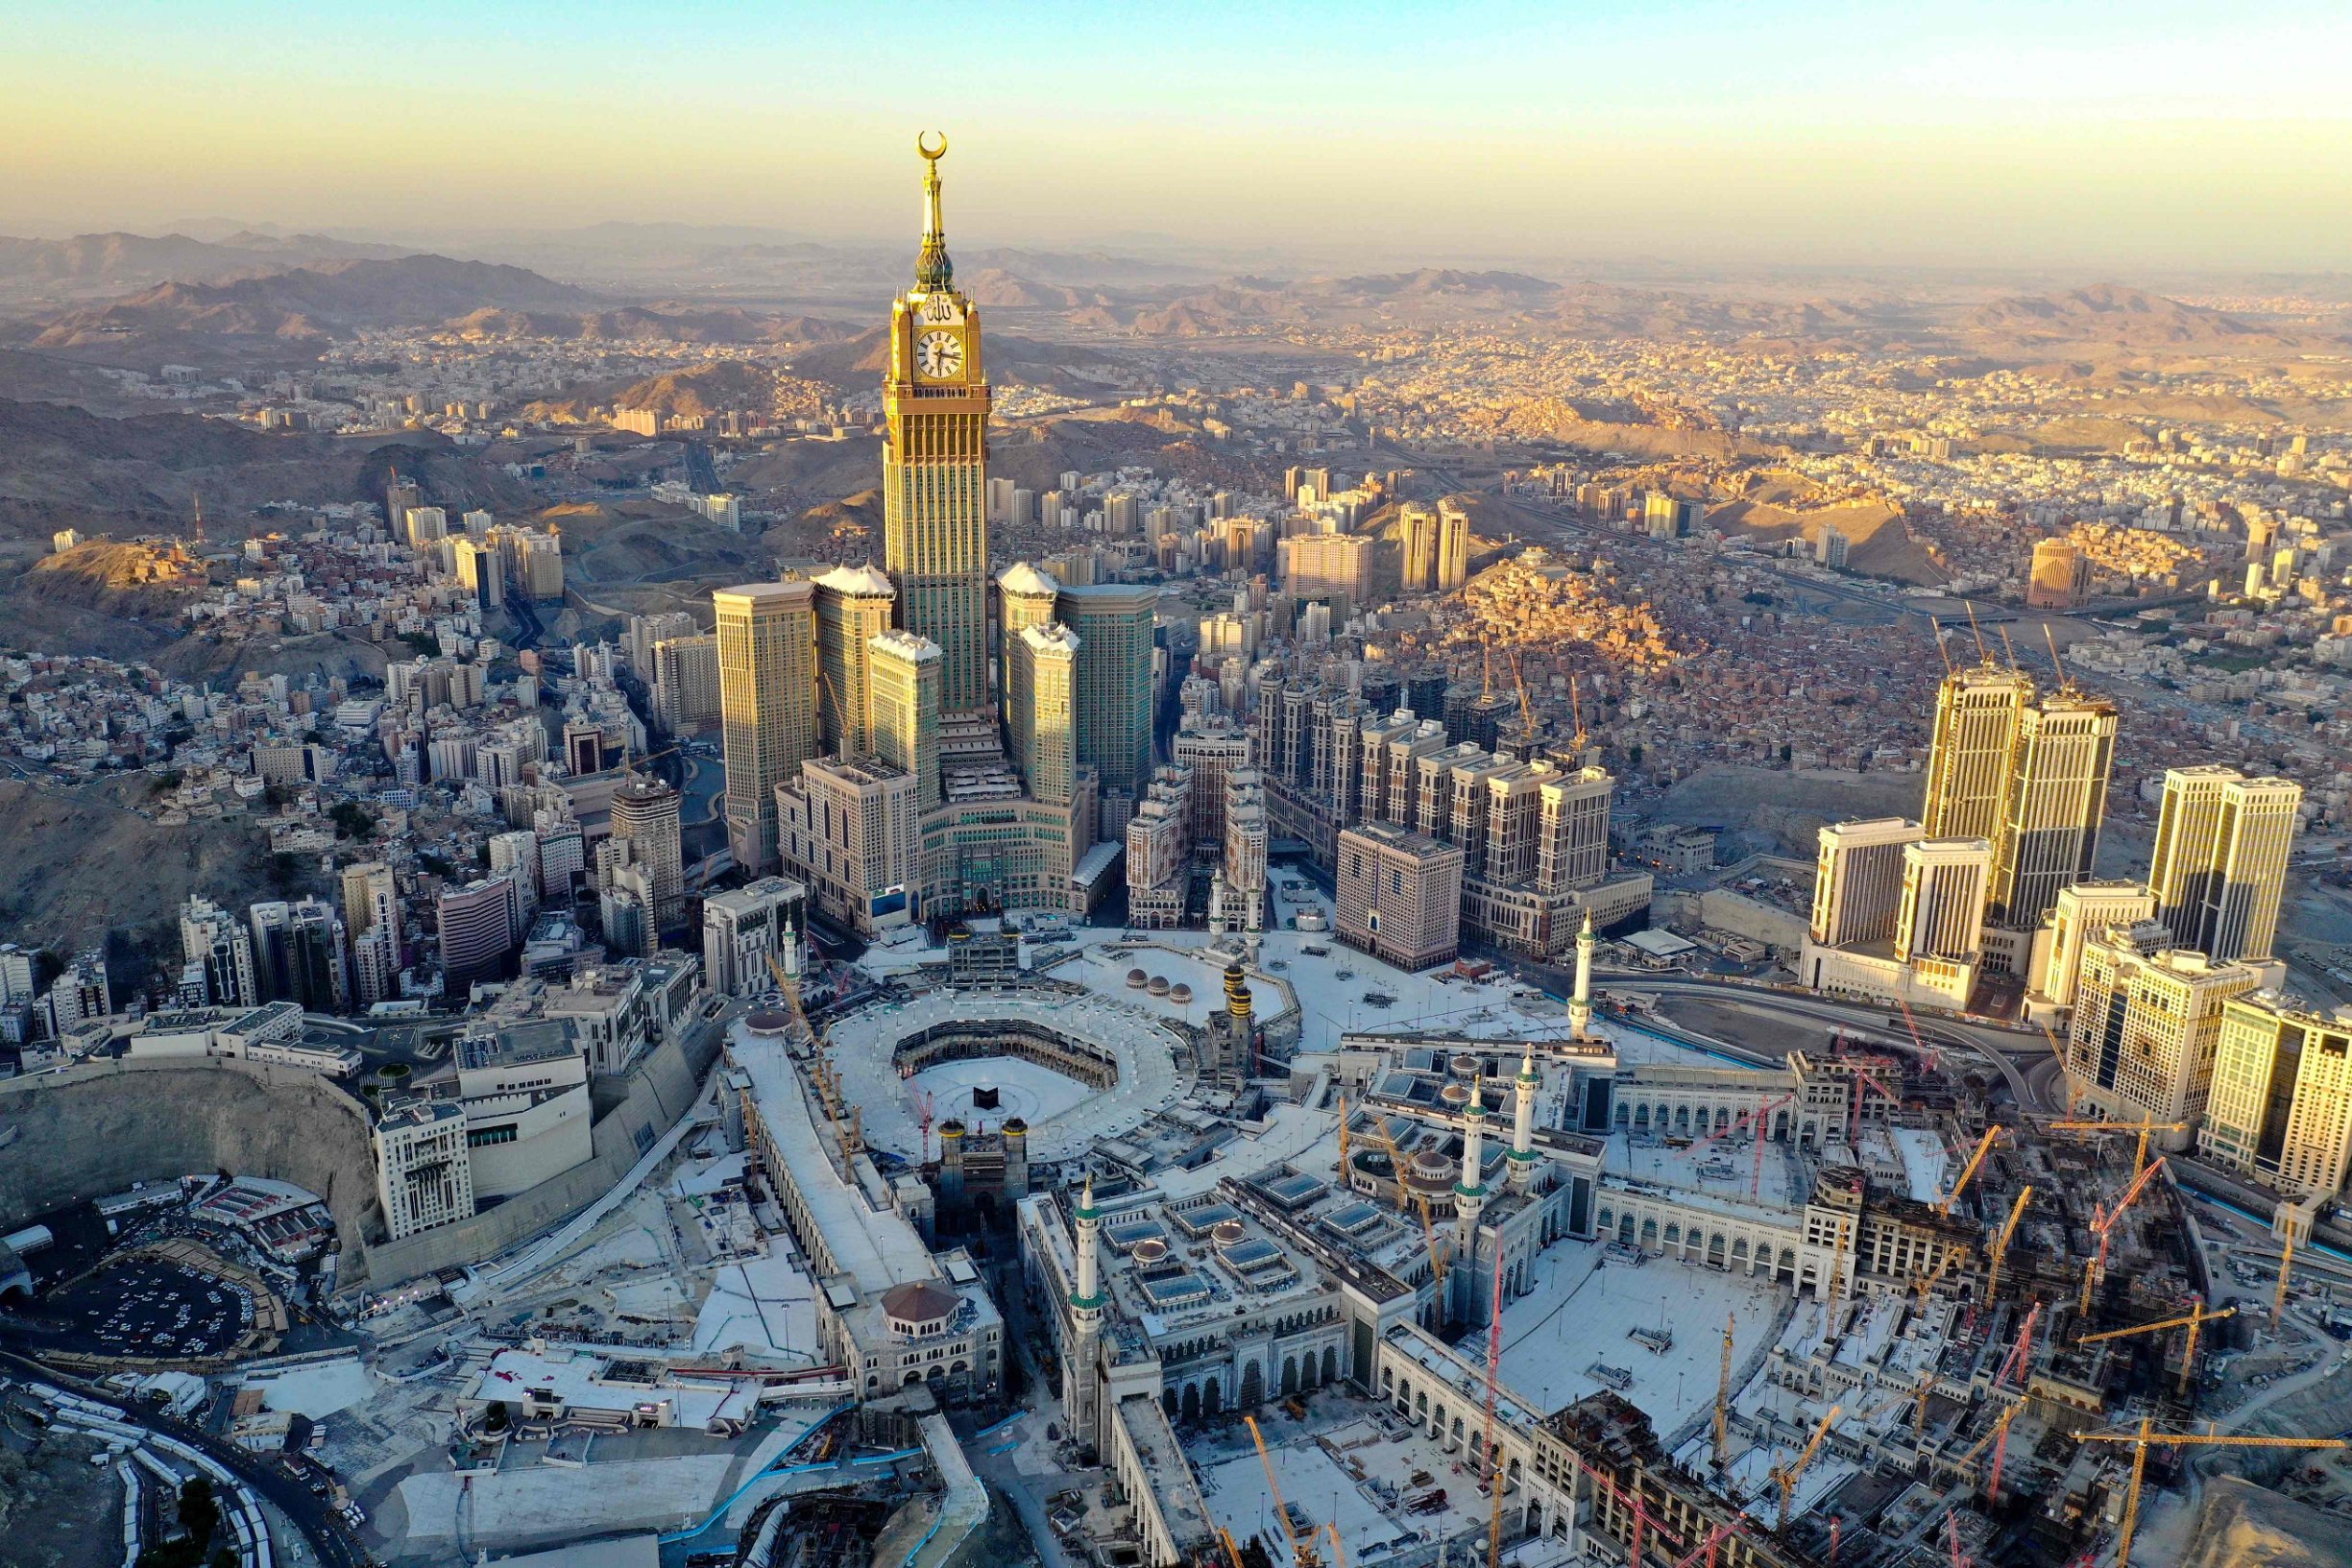 An aerial view shows the Great Mosque and the Mecca Tower in a deserted surrounding on the first day of the Muslim fasting month of Ramdan, in the Saudi holy city of Mecca, on April 24, 2020, during the novel coronavirus pandemic crisis. (Photo by BANDAR ALDANDANI / AFP)